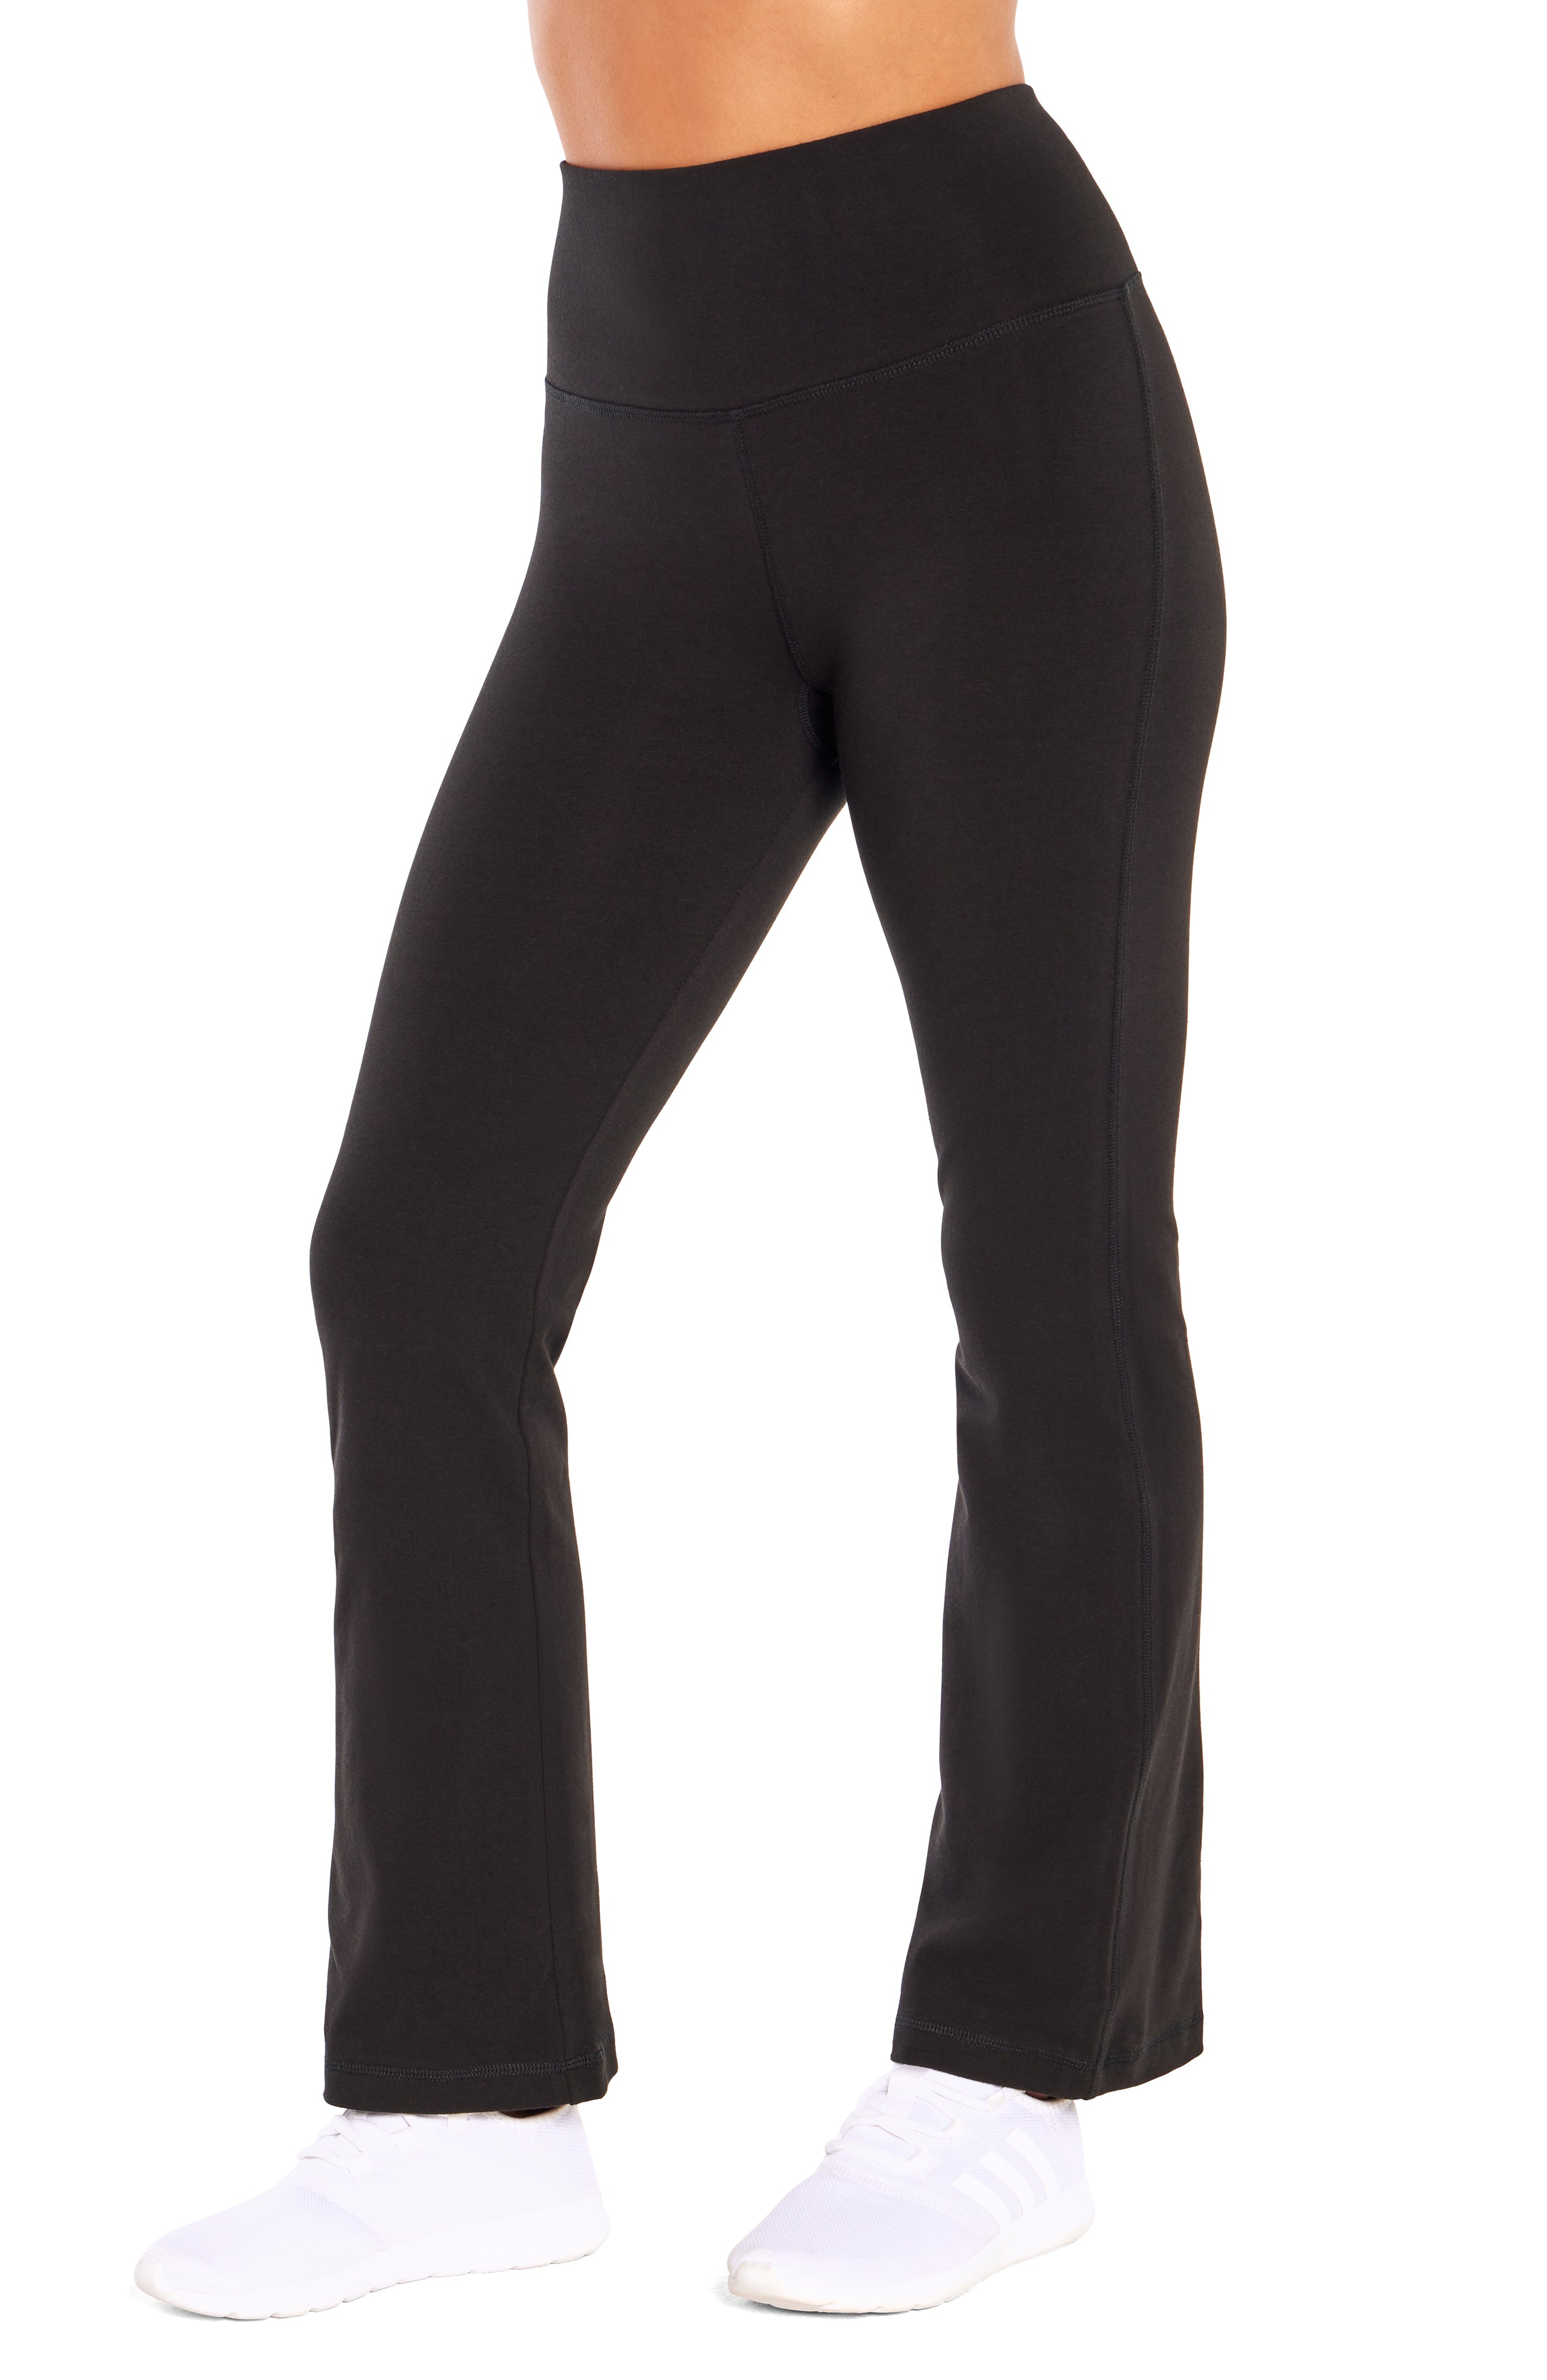 Clearance sale Marika Audrey Ultimate Slimming Pants Bottoms, Perfect  Gifts